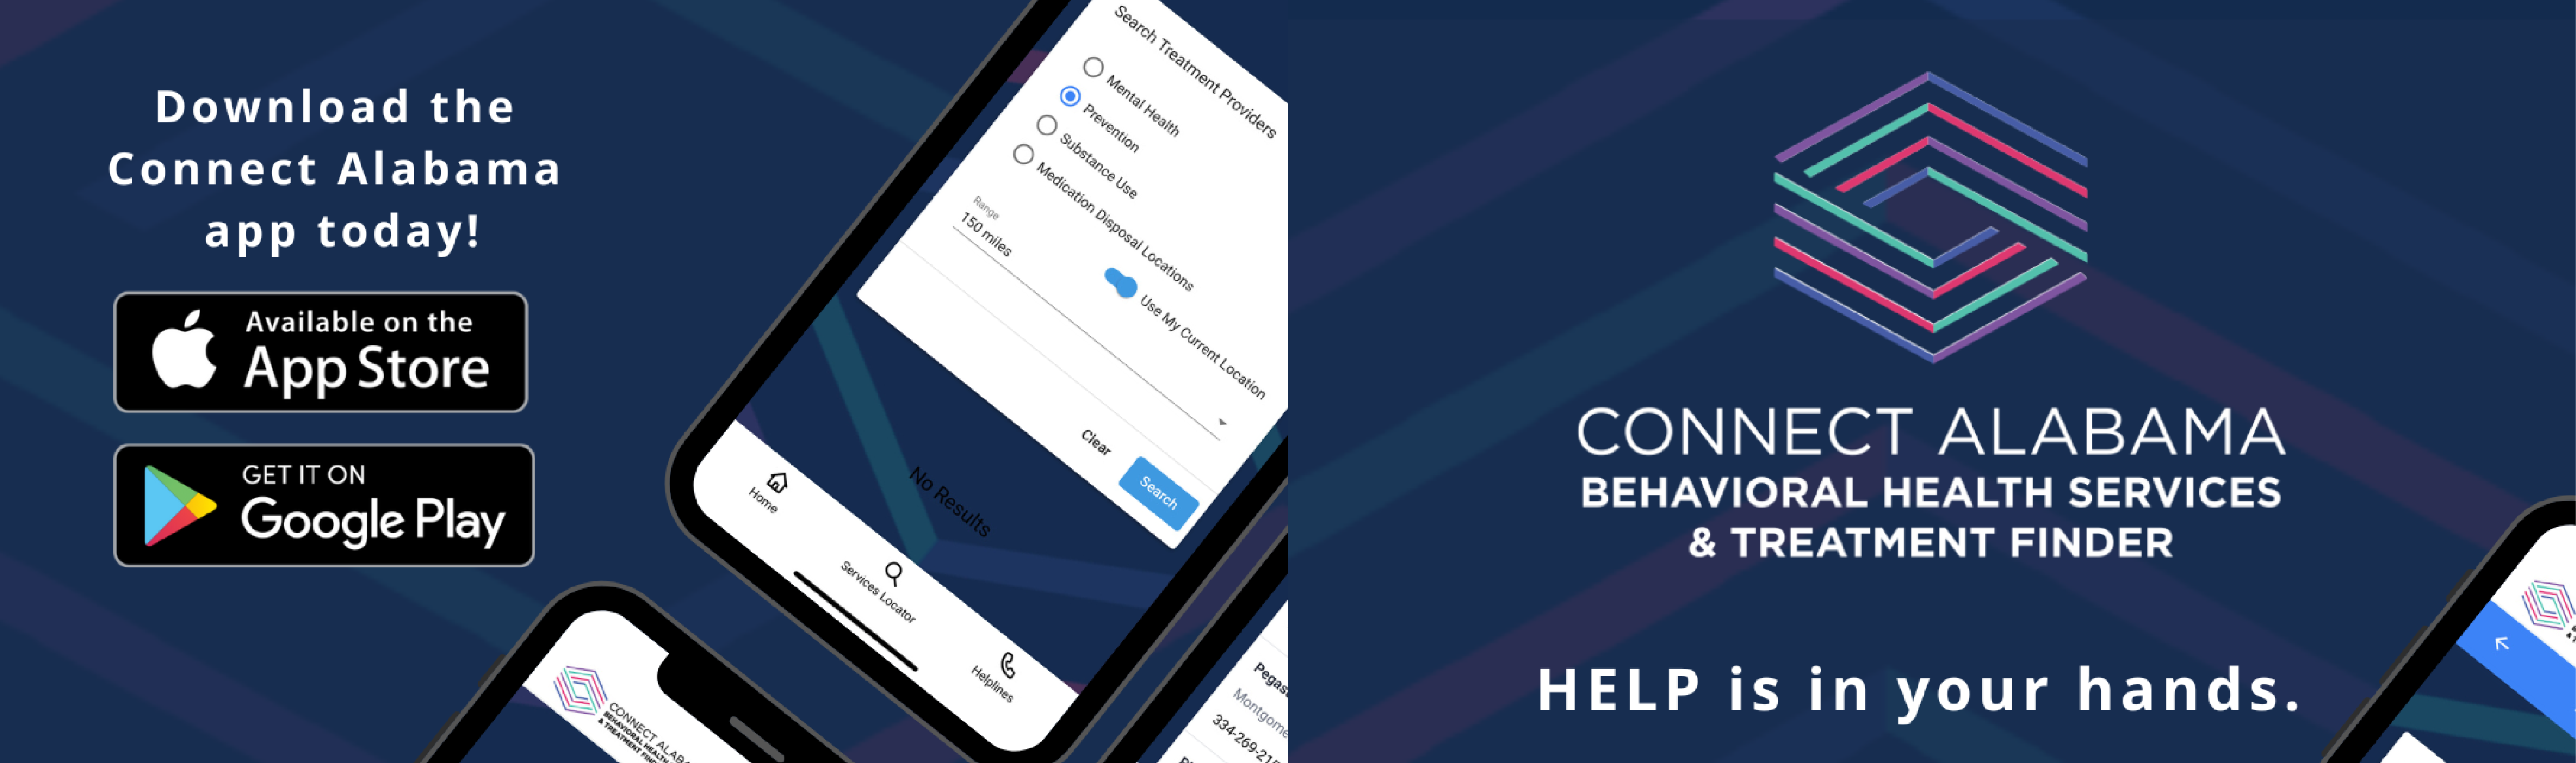 Click to learn more about the Connect Alabama Behavioral Health Services & Treatment Finder app. Help is in your hands.